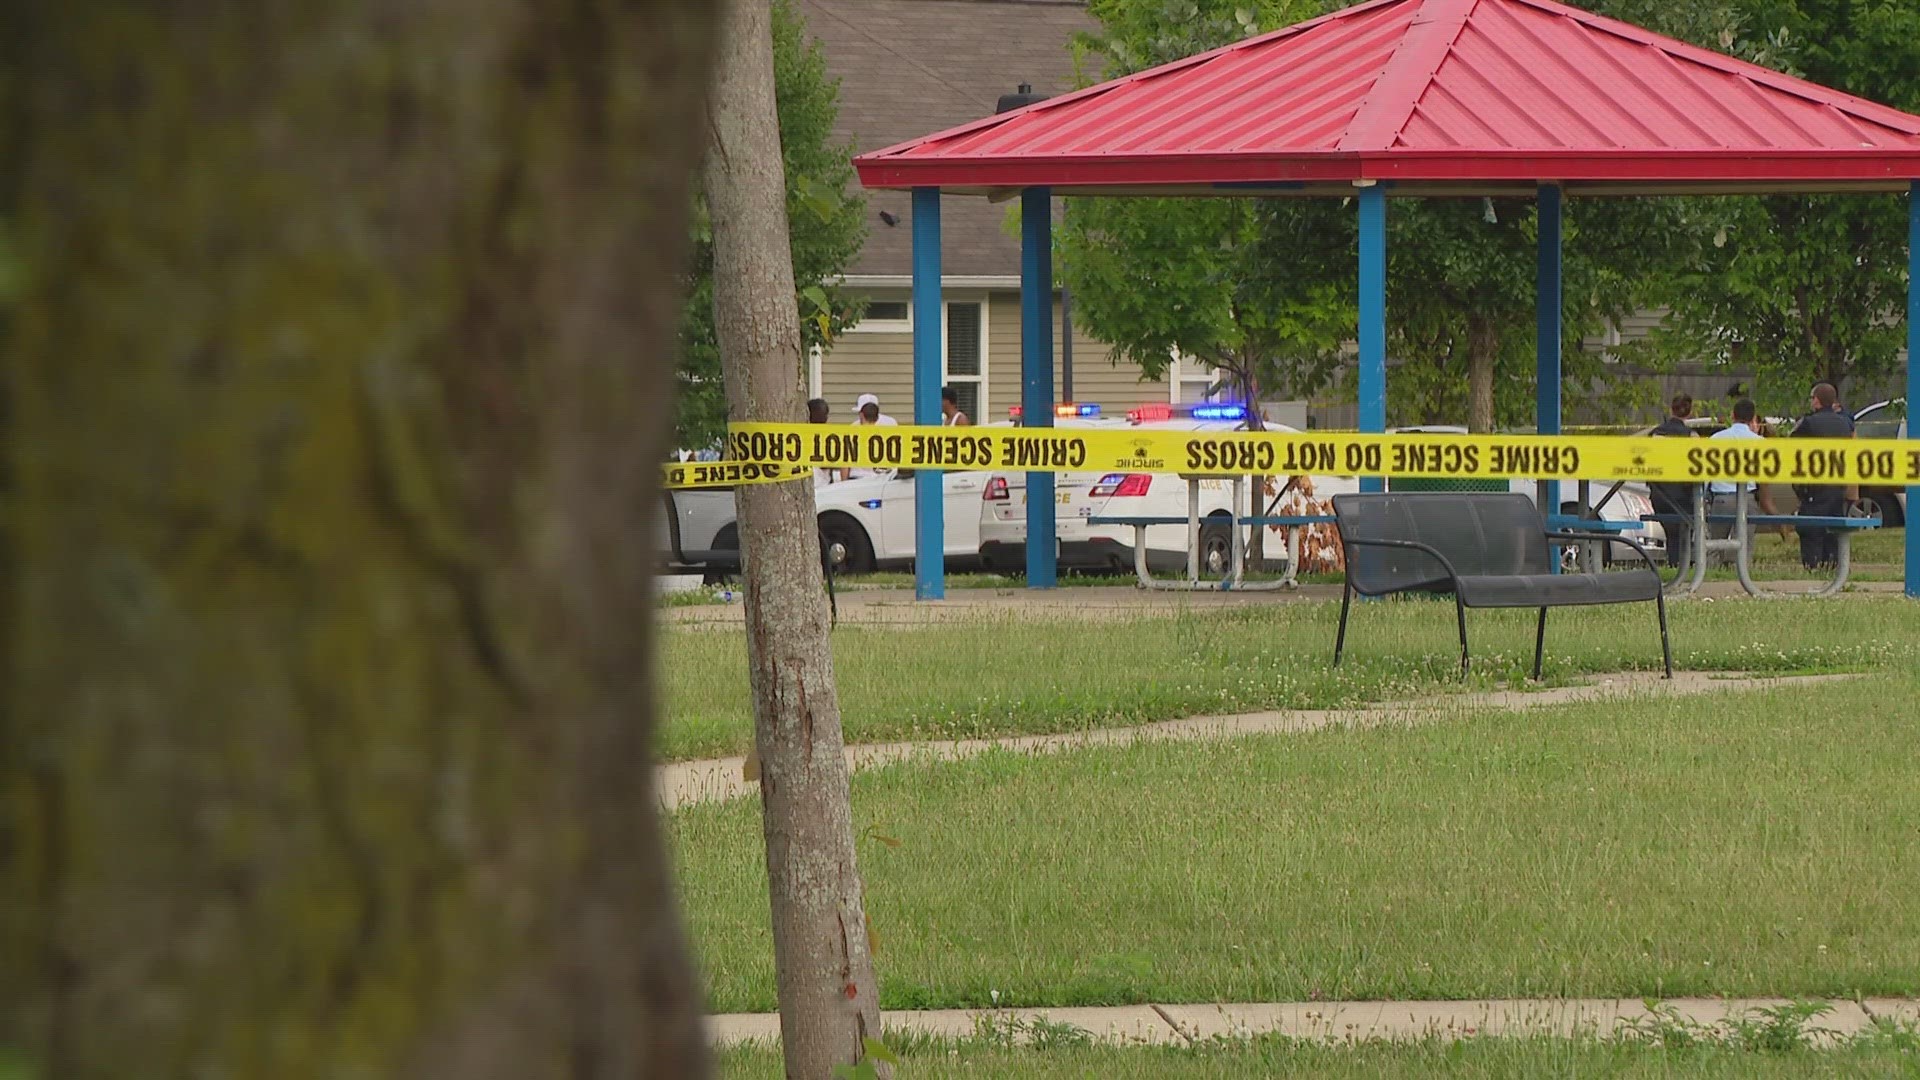 A neighborhood on the southeast side of Indianapolis is reeling after a shooting in their community park.